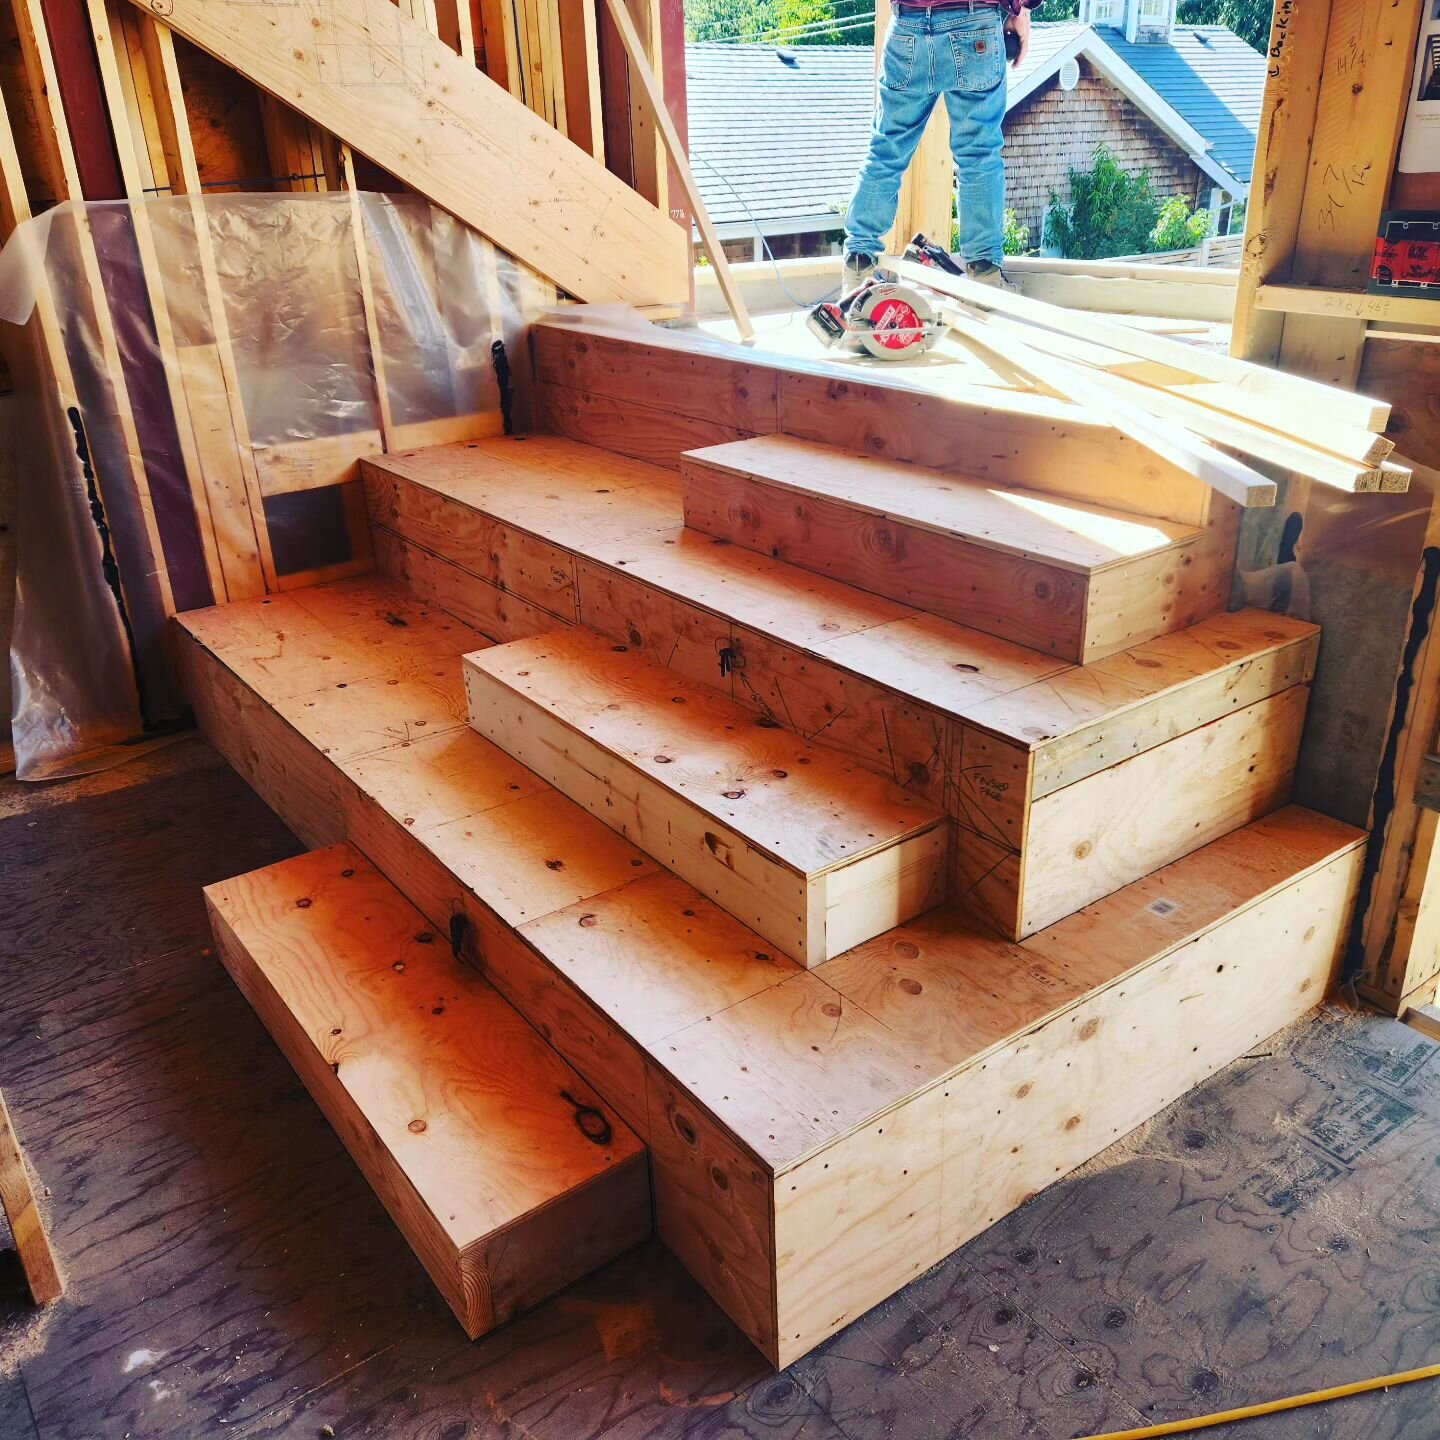 Funky little set of stairs this morning. 

#carpenter #builder #buildstuff #customhomes #luxuryhomes #framersareadyingbreed #framing #contractor #vancouverisland